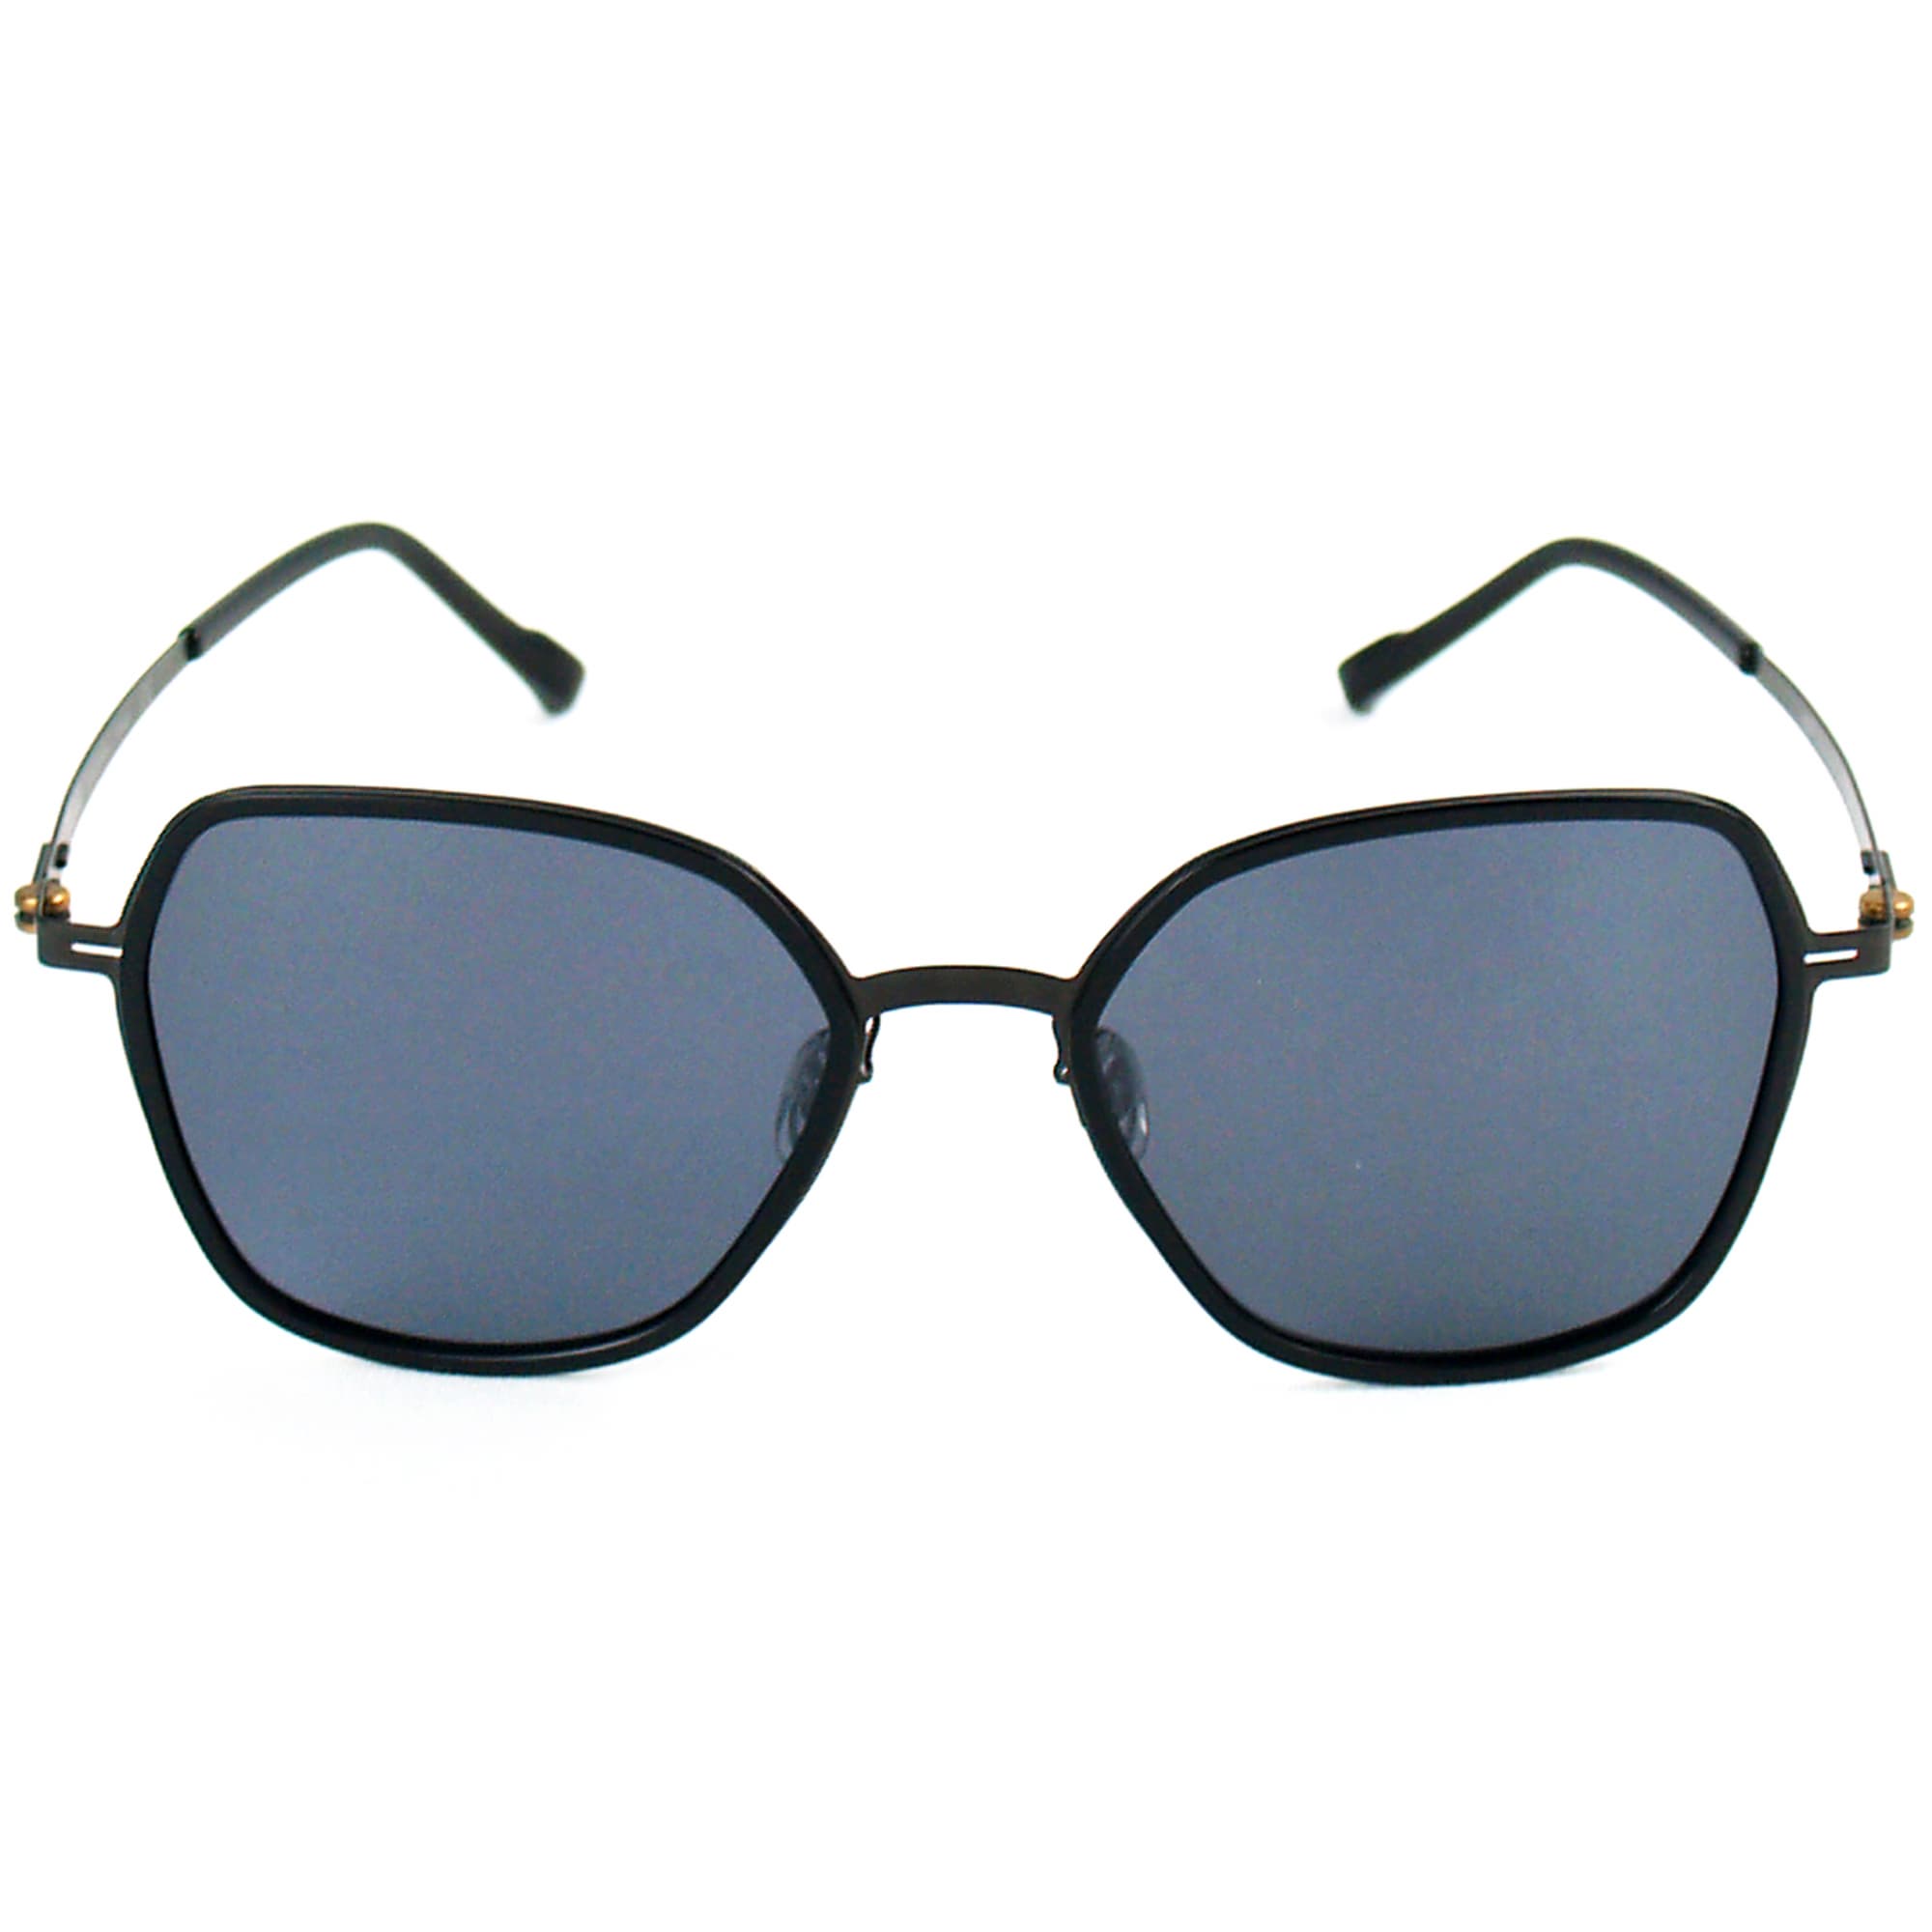 Vintage Acetate _ Thin Stainless Steel  Frame Sunglasses